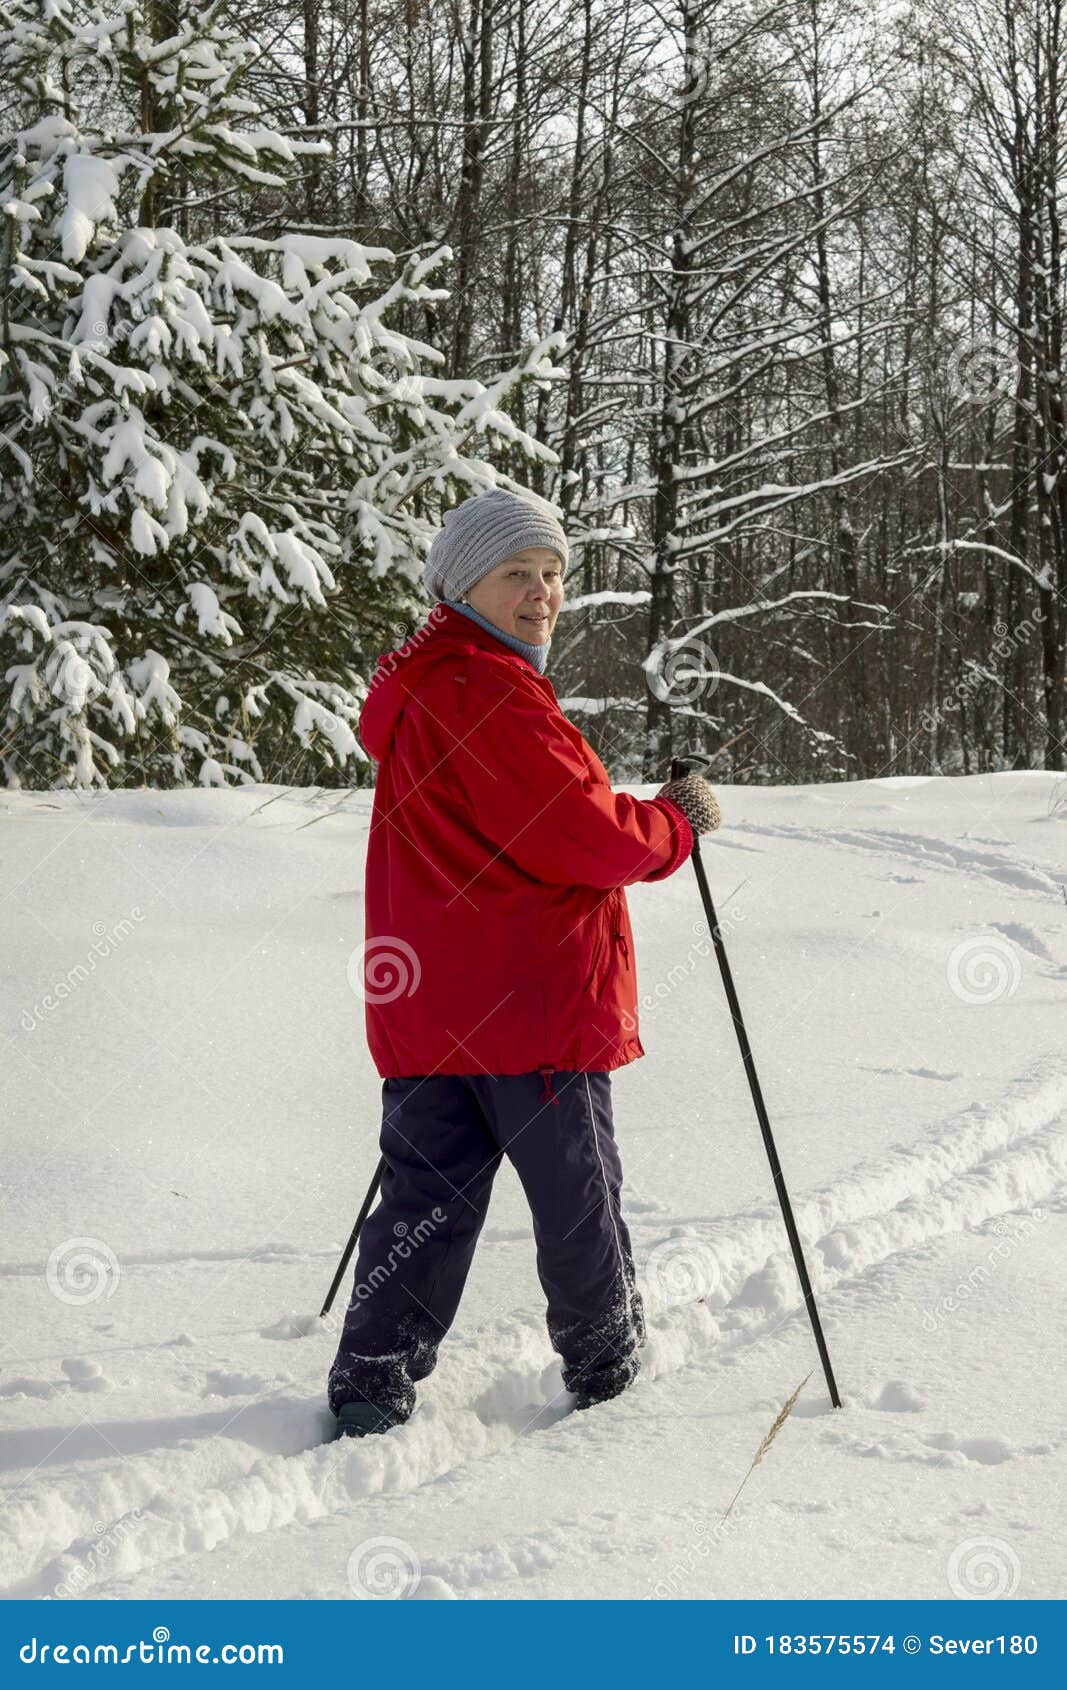 Woman Skiing on a Frosty Winter Day Stock Photo - Image of fresh, cold ...